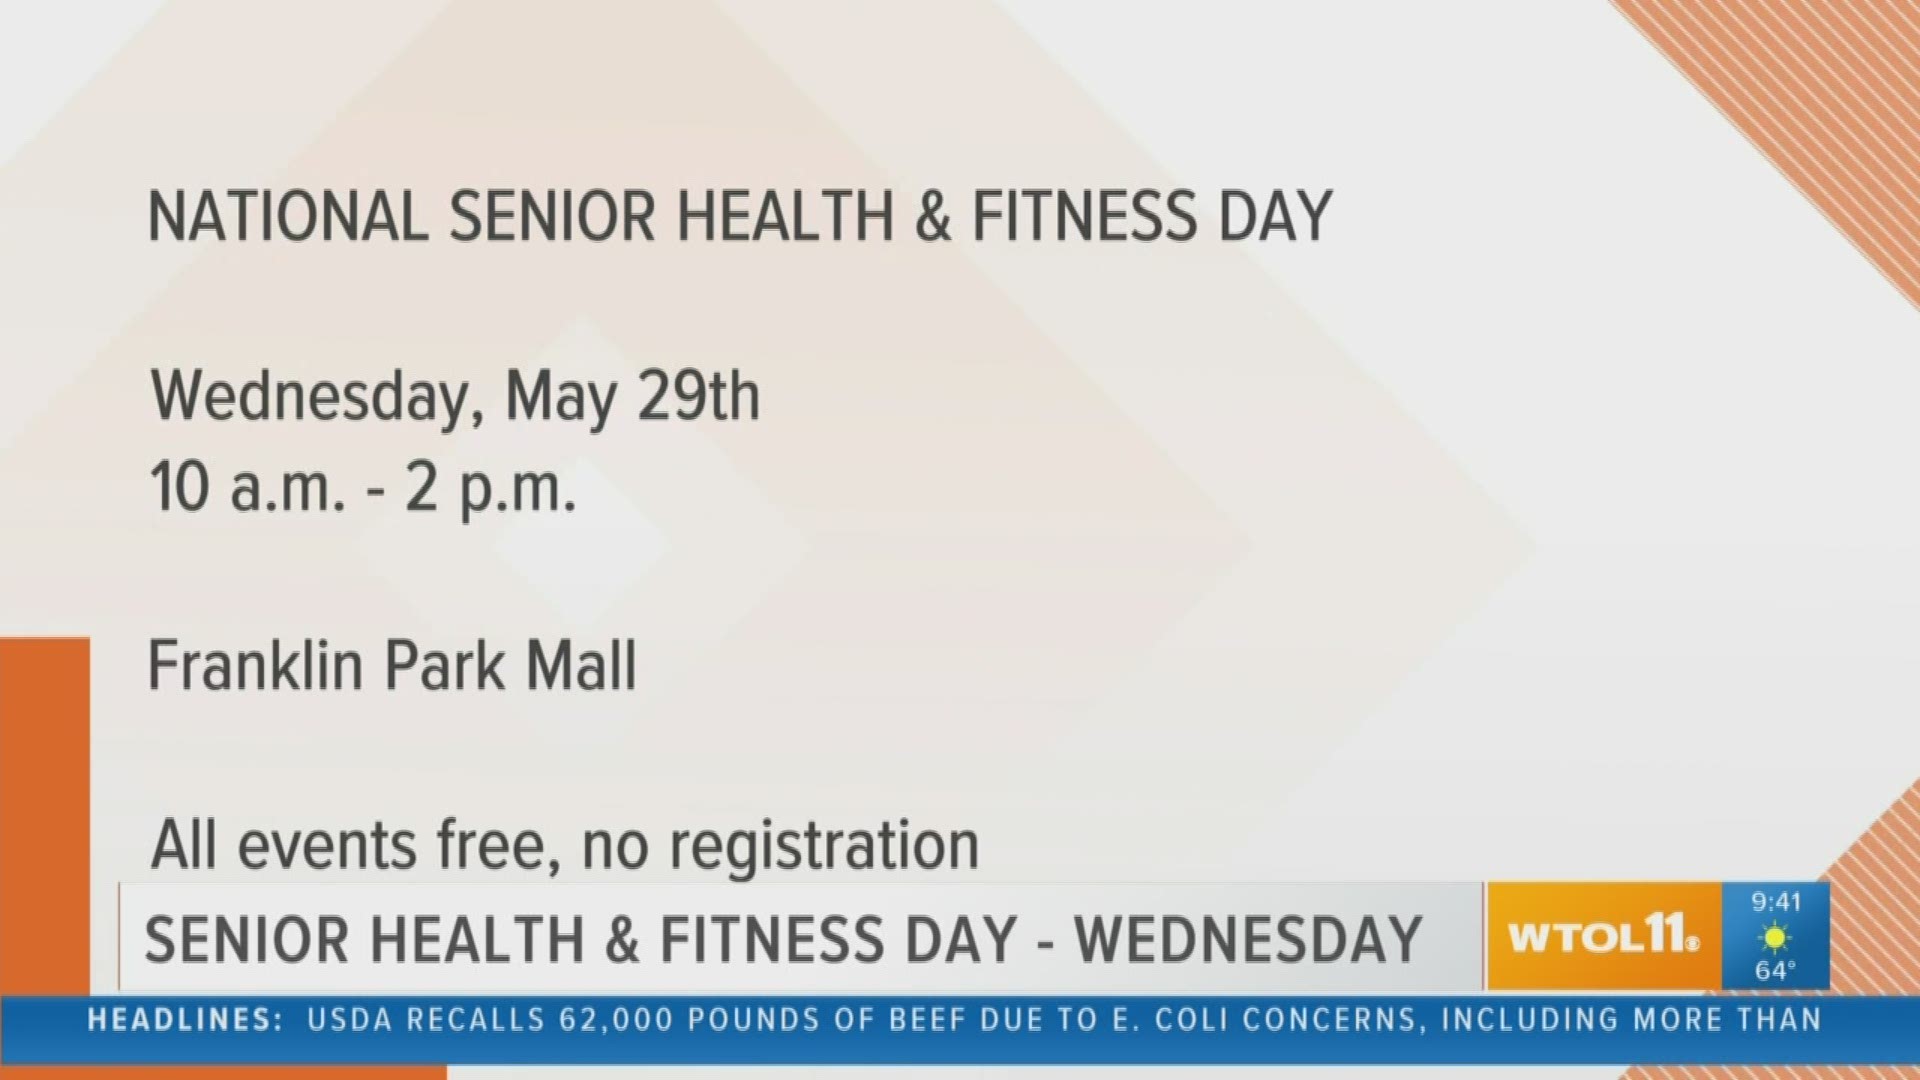 Everyone is invited to participate in Ohio Senior Health and Fitness Day on Wednesday.